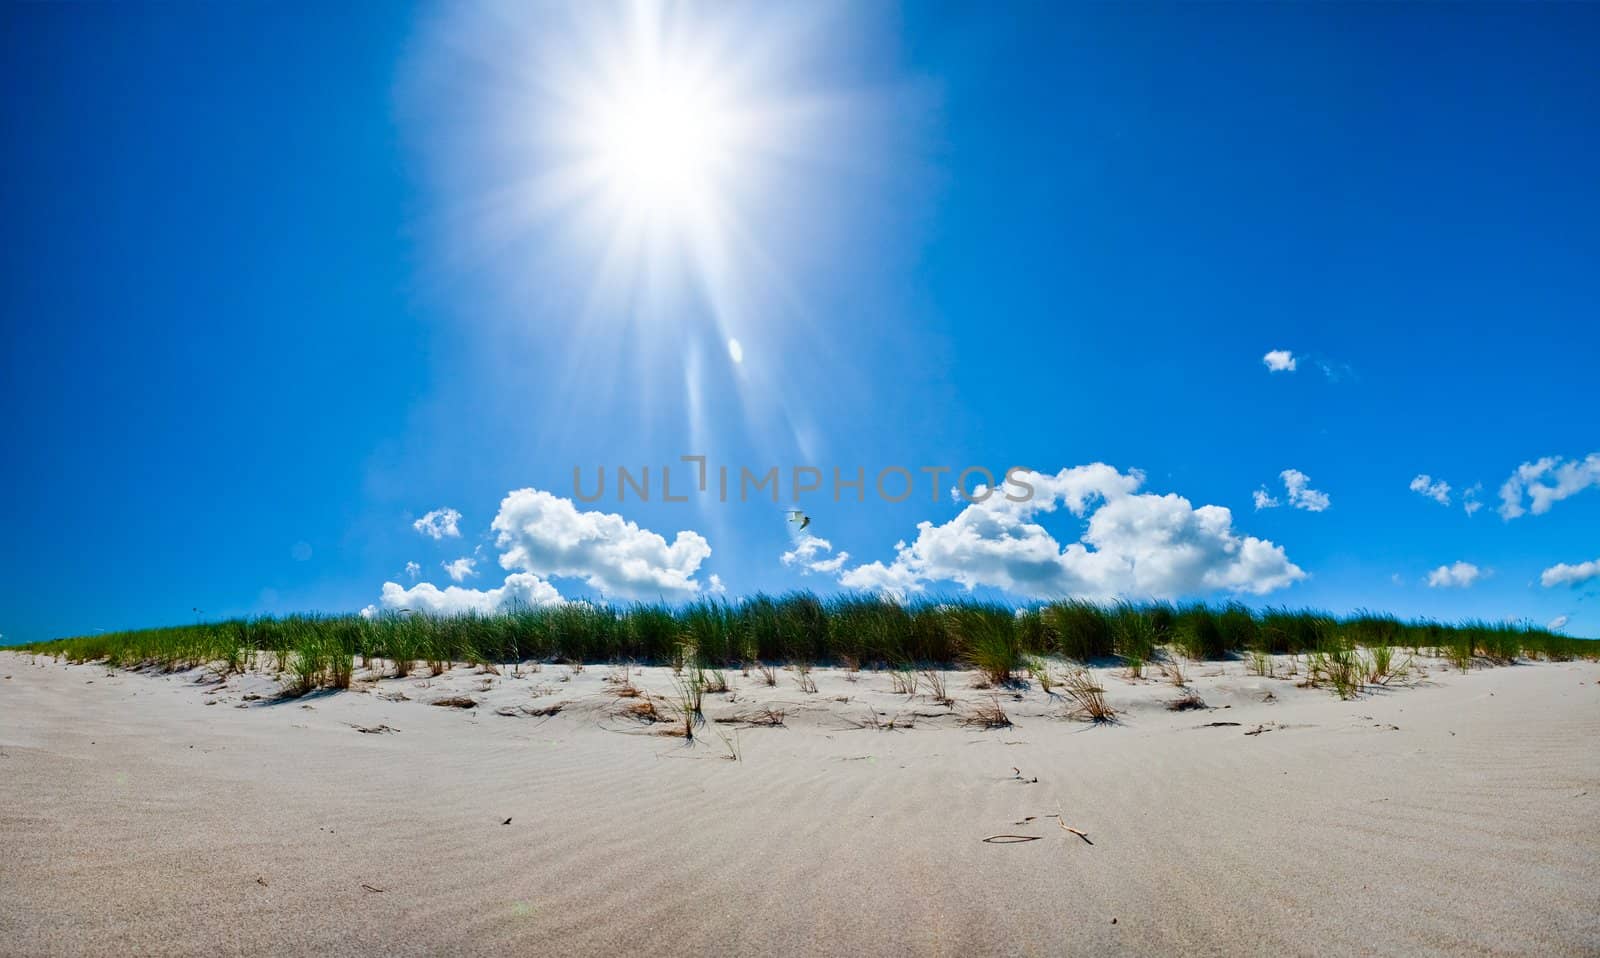 sun shining above a dune at the beach, baltic sea, germany